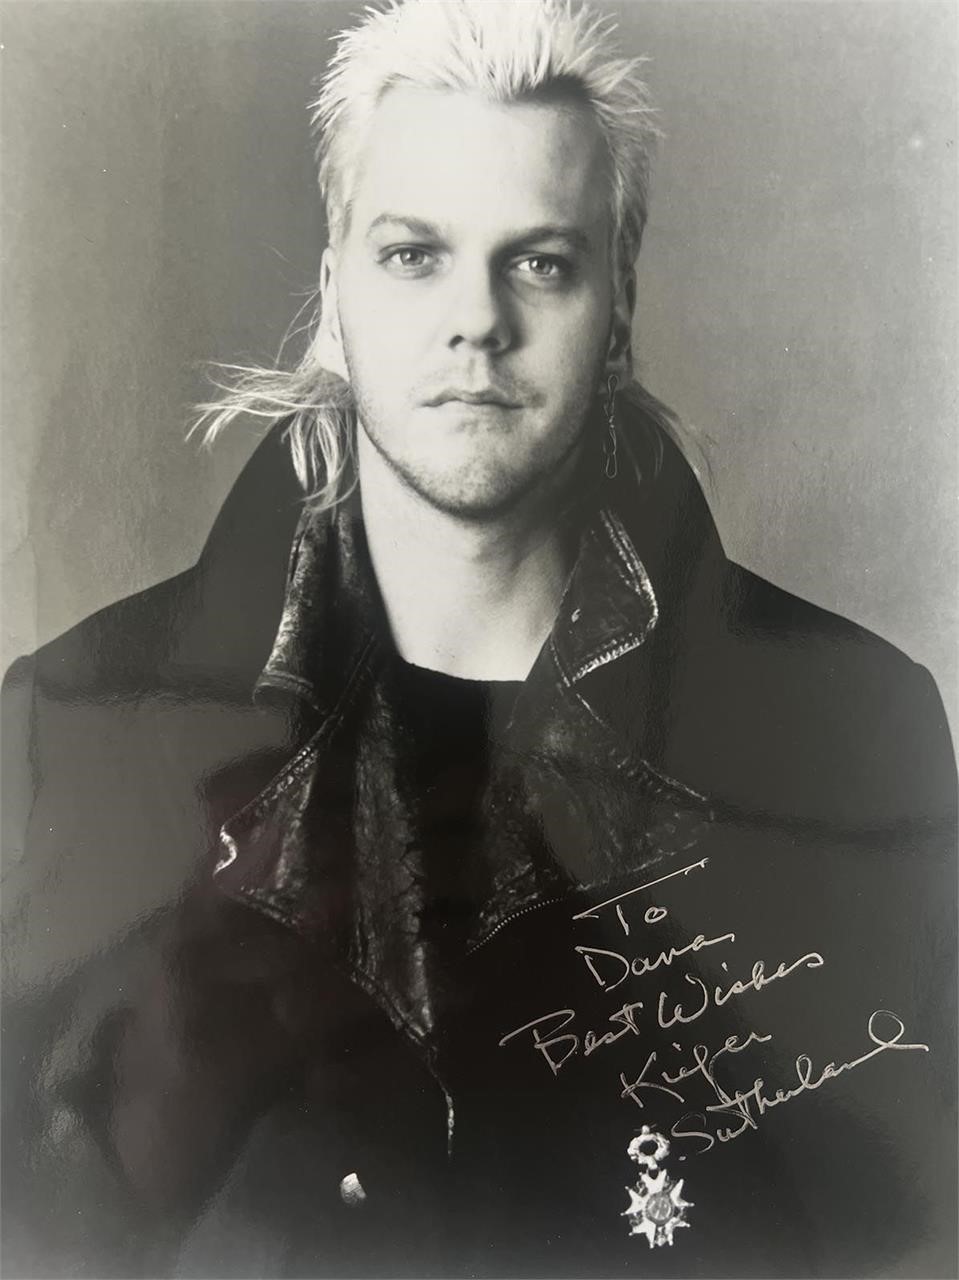 The Lost Boys Kiefer Sutherland signed movie photo